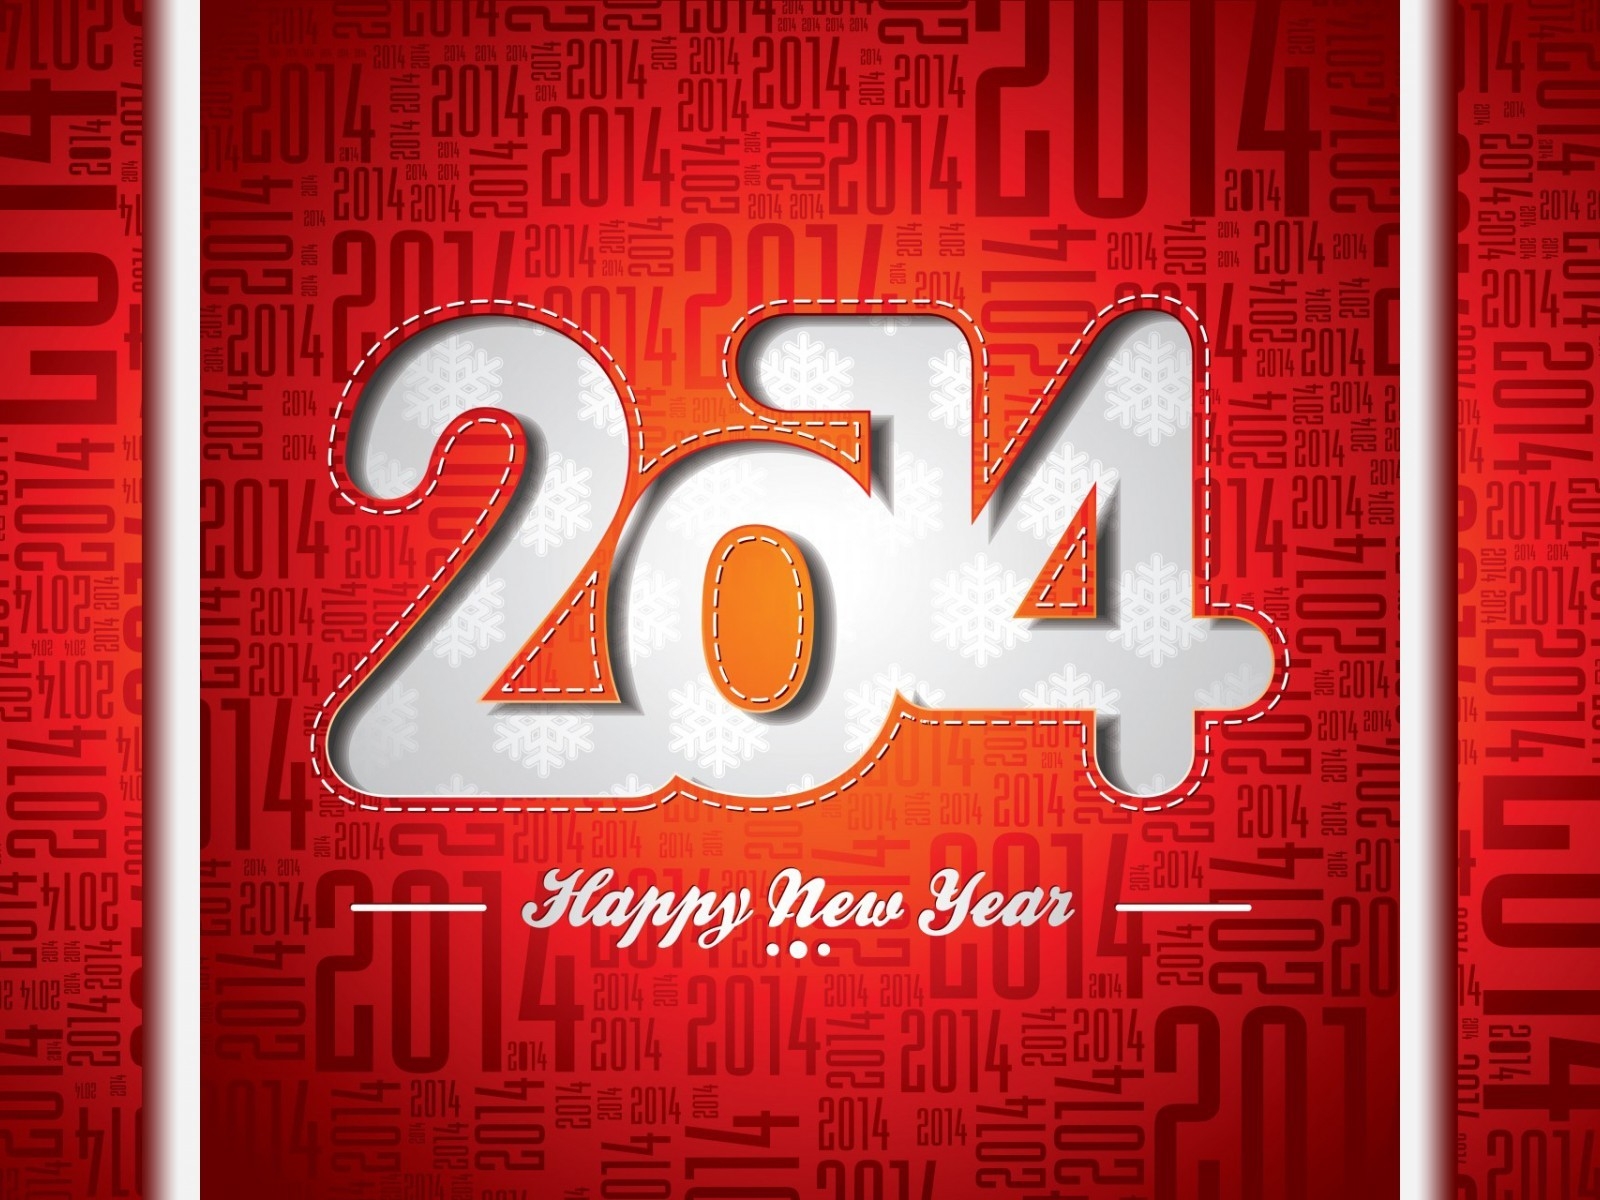 Happy New Year 2014 for 1600 x 1200 resolution